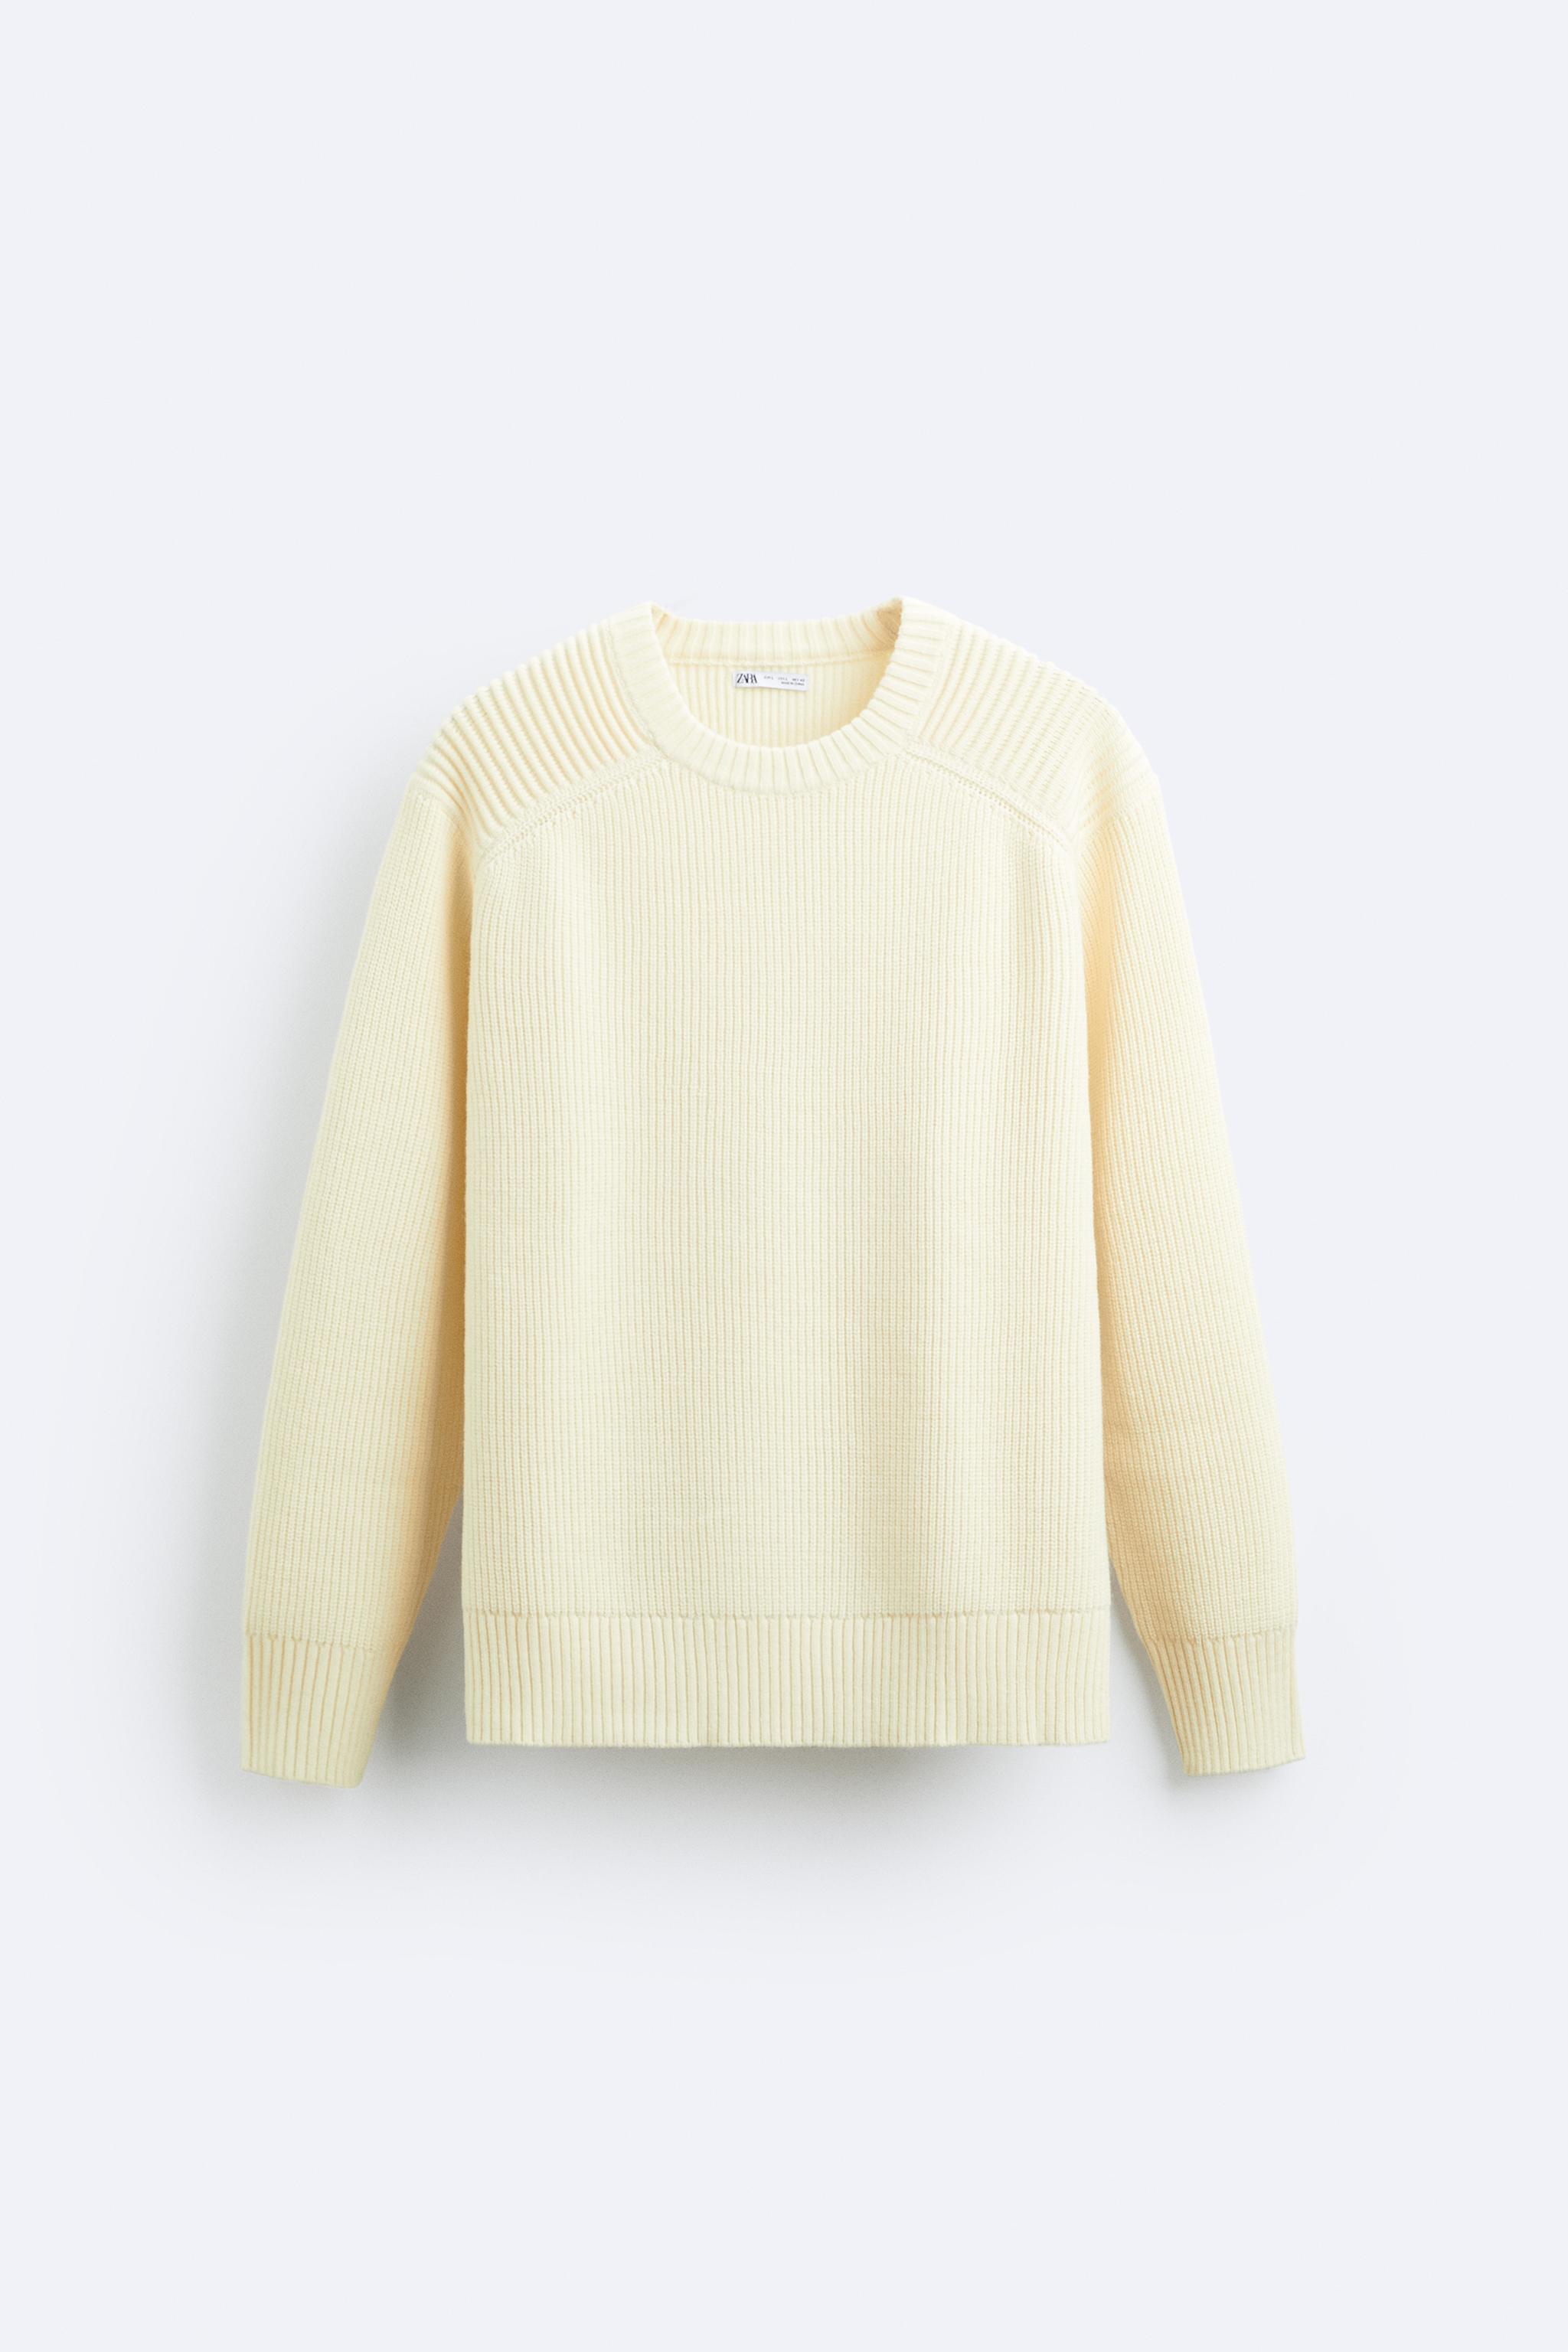 STRUCTURED SOFT SWEATER - White